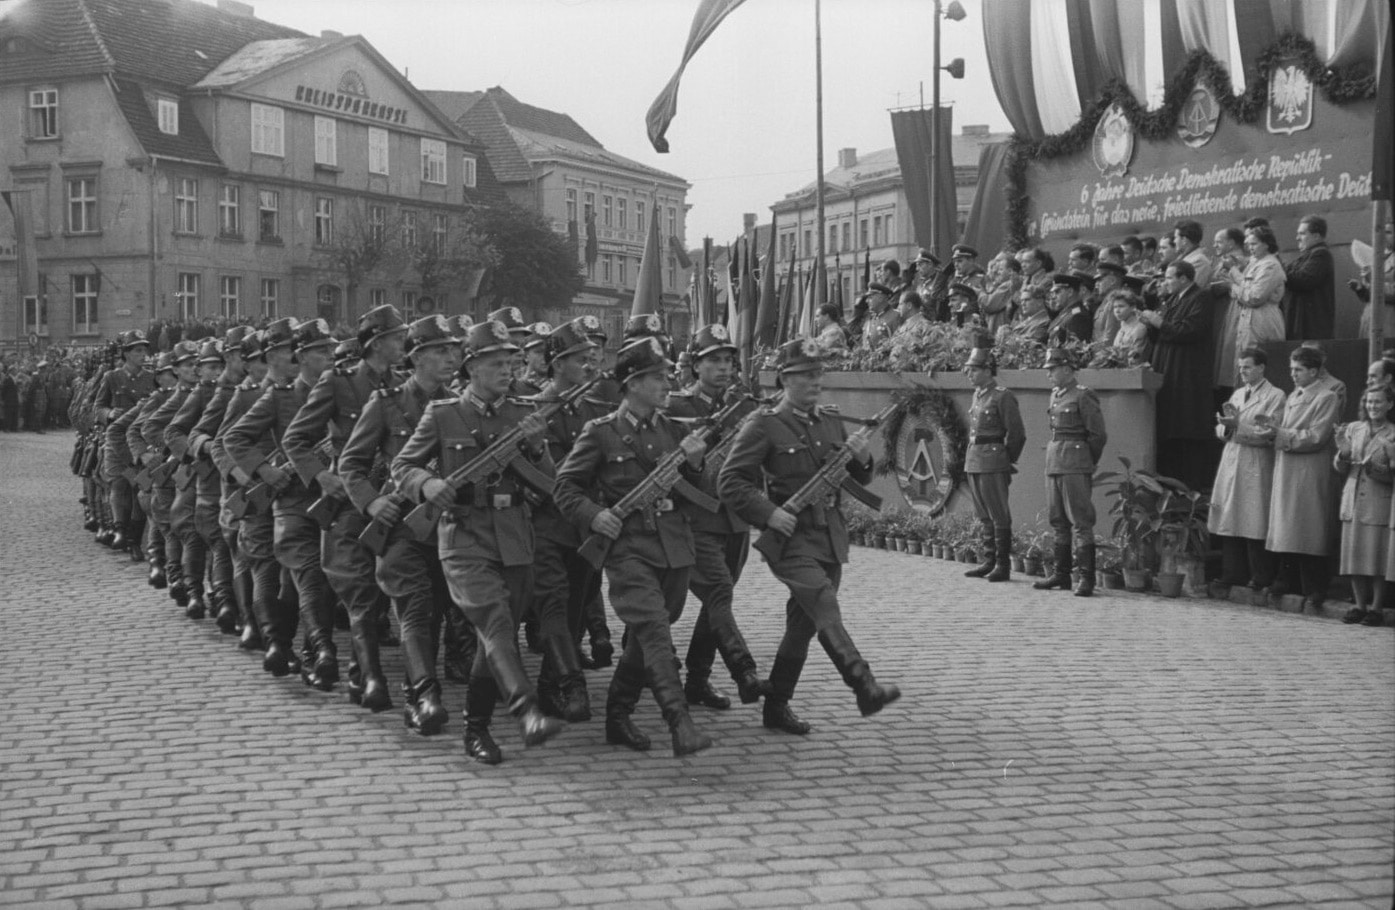 East German Soldiers with StG44 rifles during parade in 1955